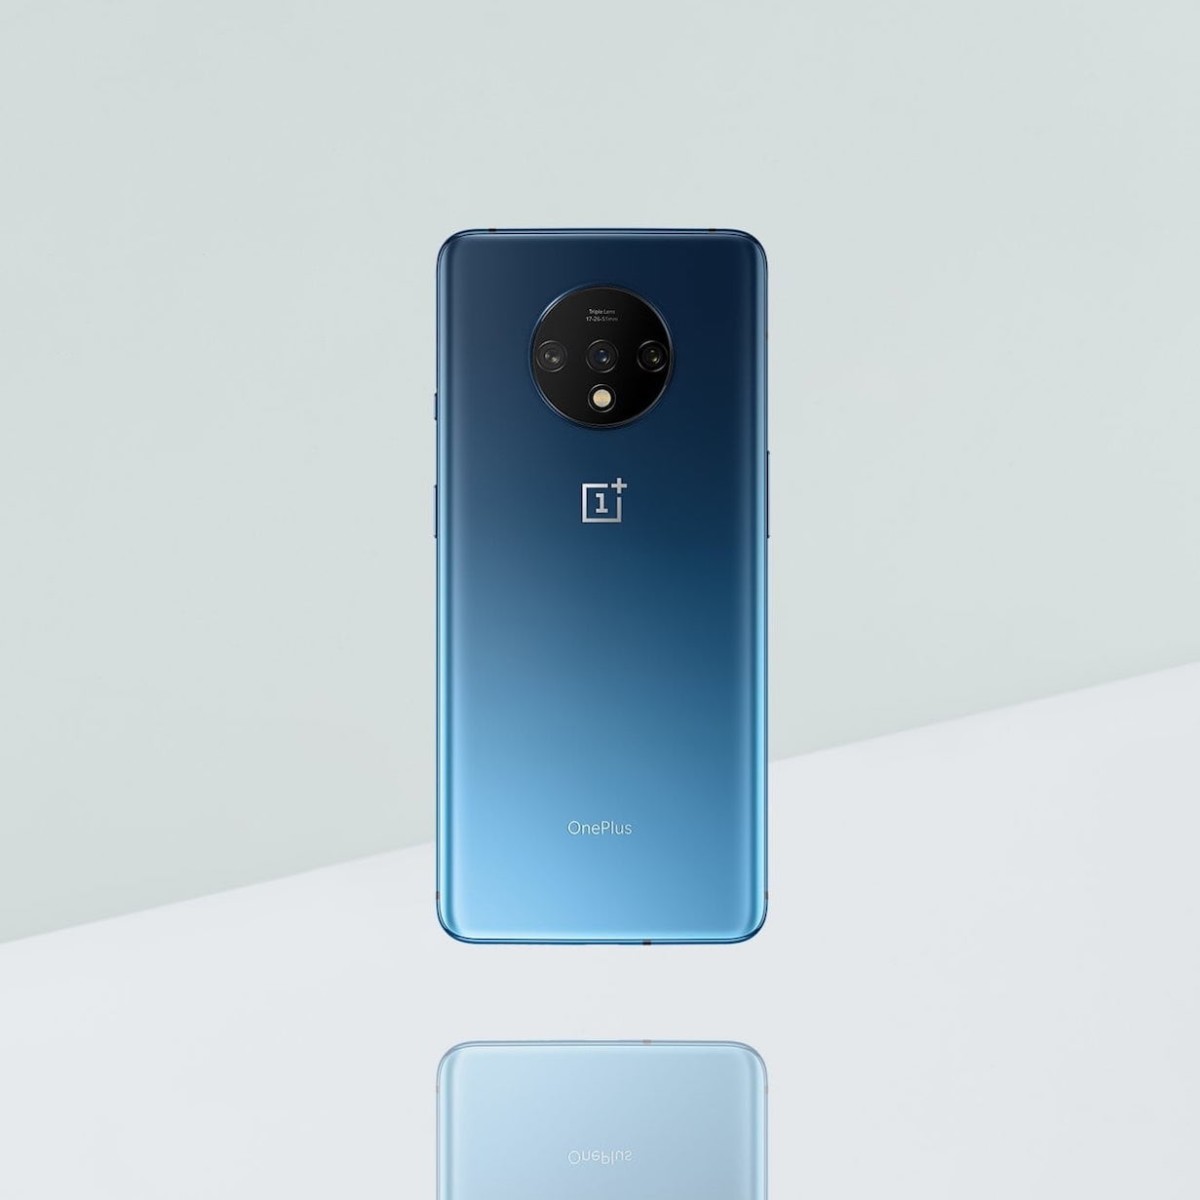 OnePlus 7T Narrow-Display Smartphone comes with Android 10 from the get-go